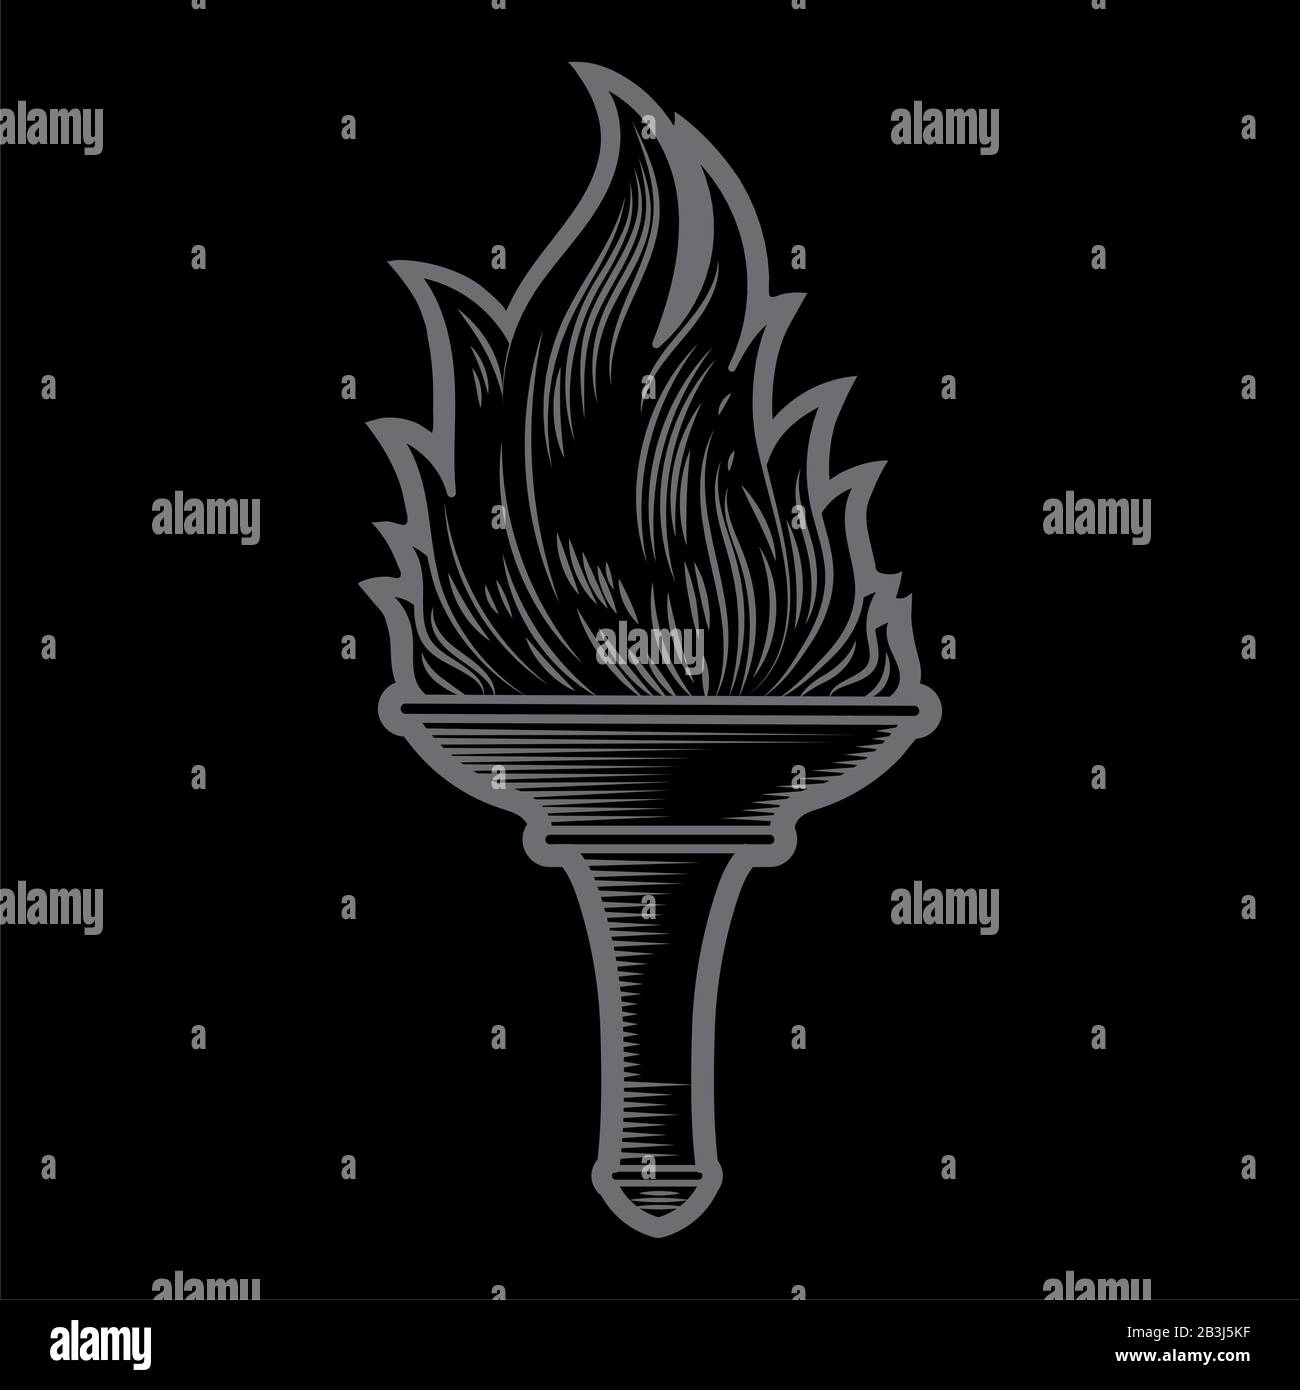 Flambeau torch Stock Vector Images - Alamy